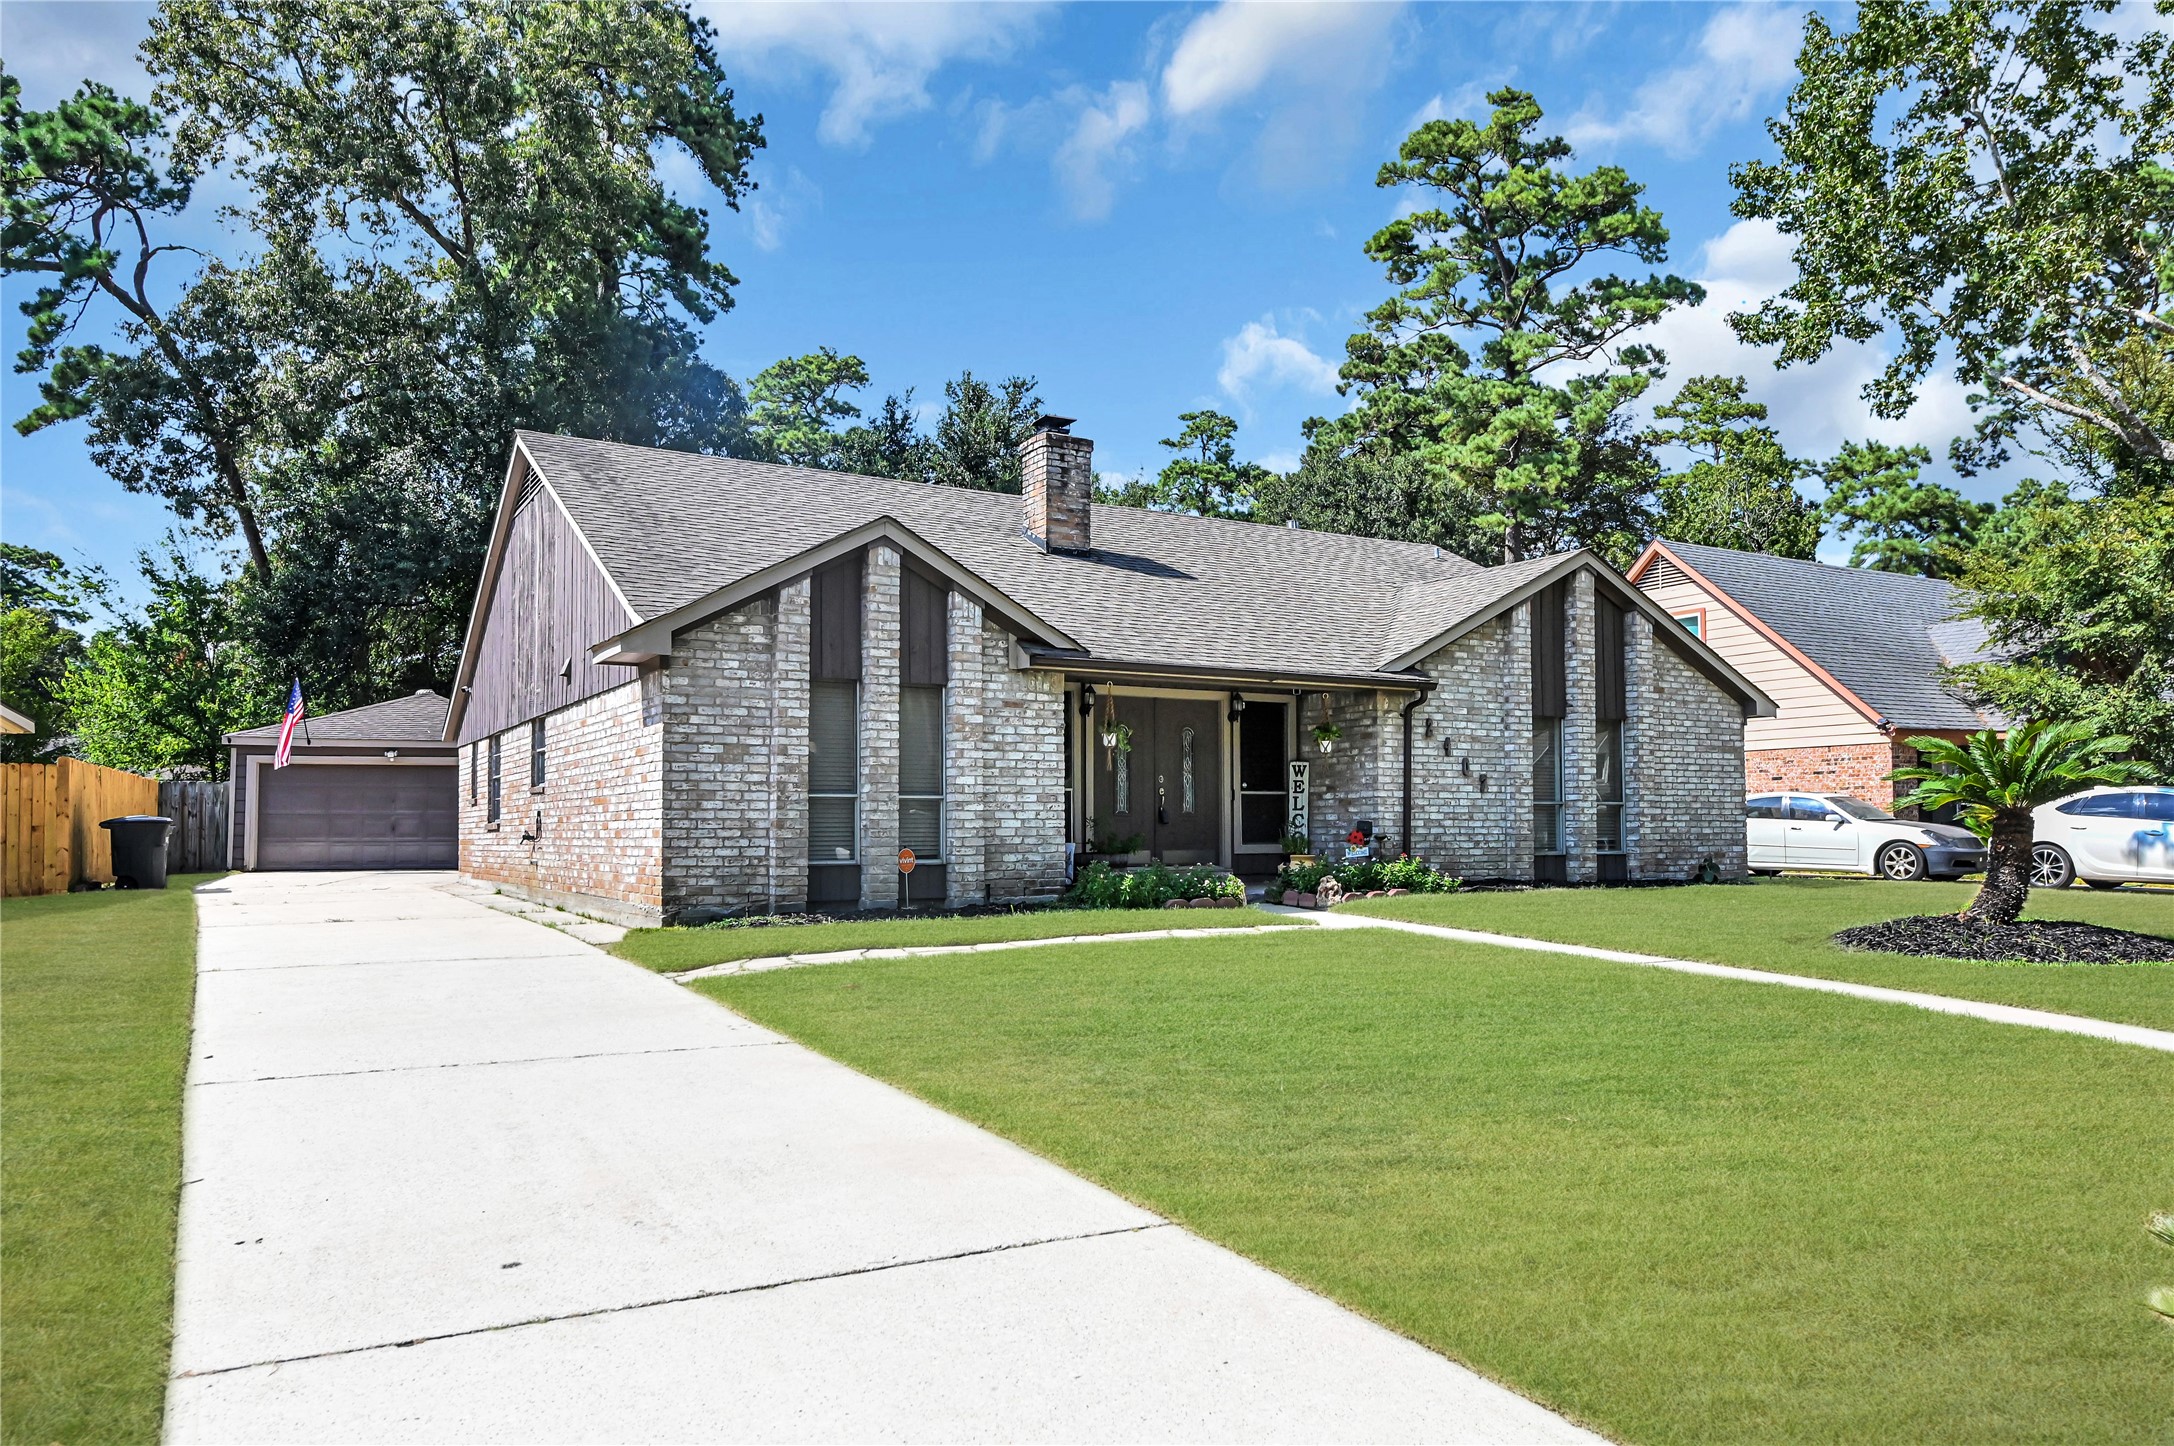 HOME SWEET HOME! This spacious 1 story home is located in the Timber Lane community, approximately 20 miles north of Downtown Houston. Conveniently located near I-45 and Hardy Toll Rd.